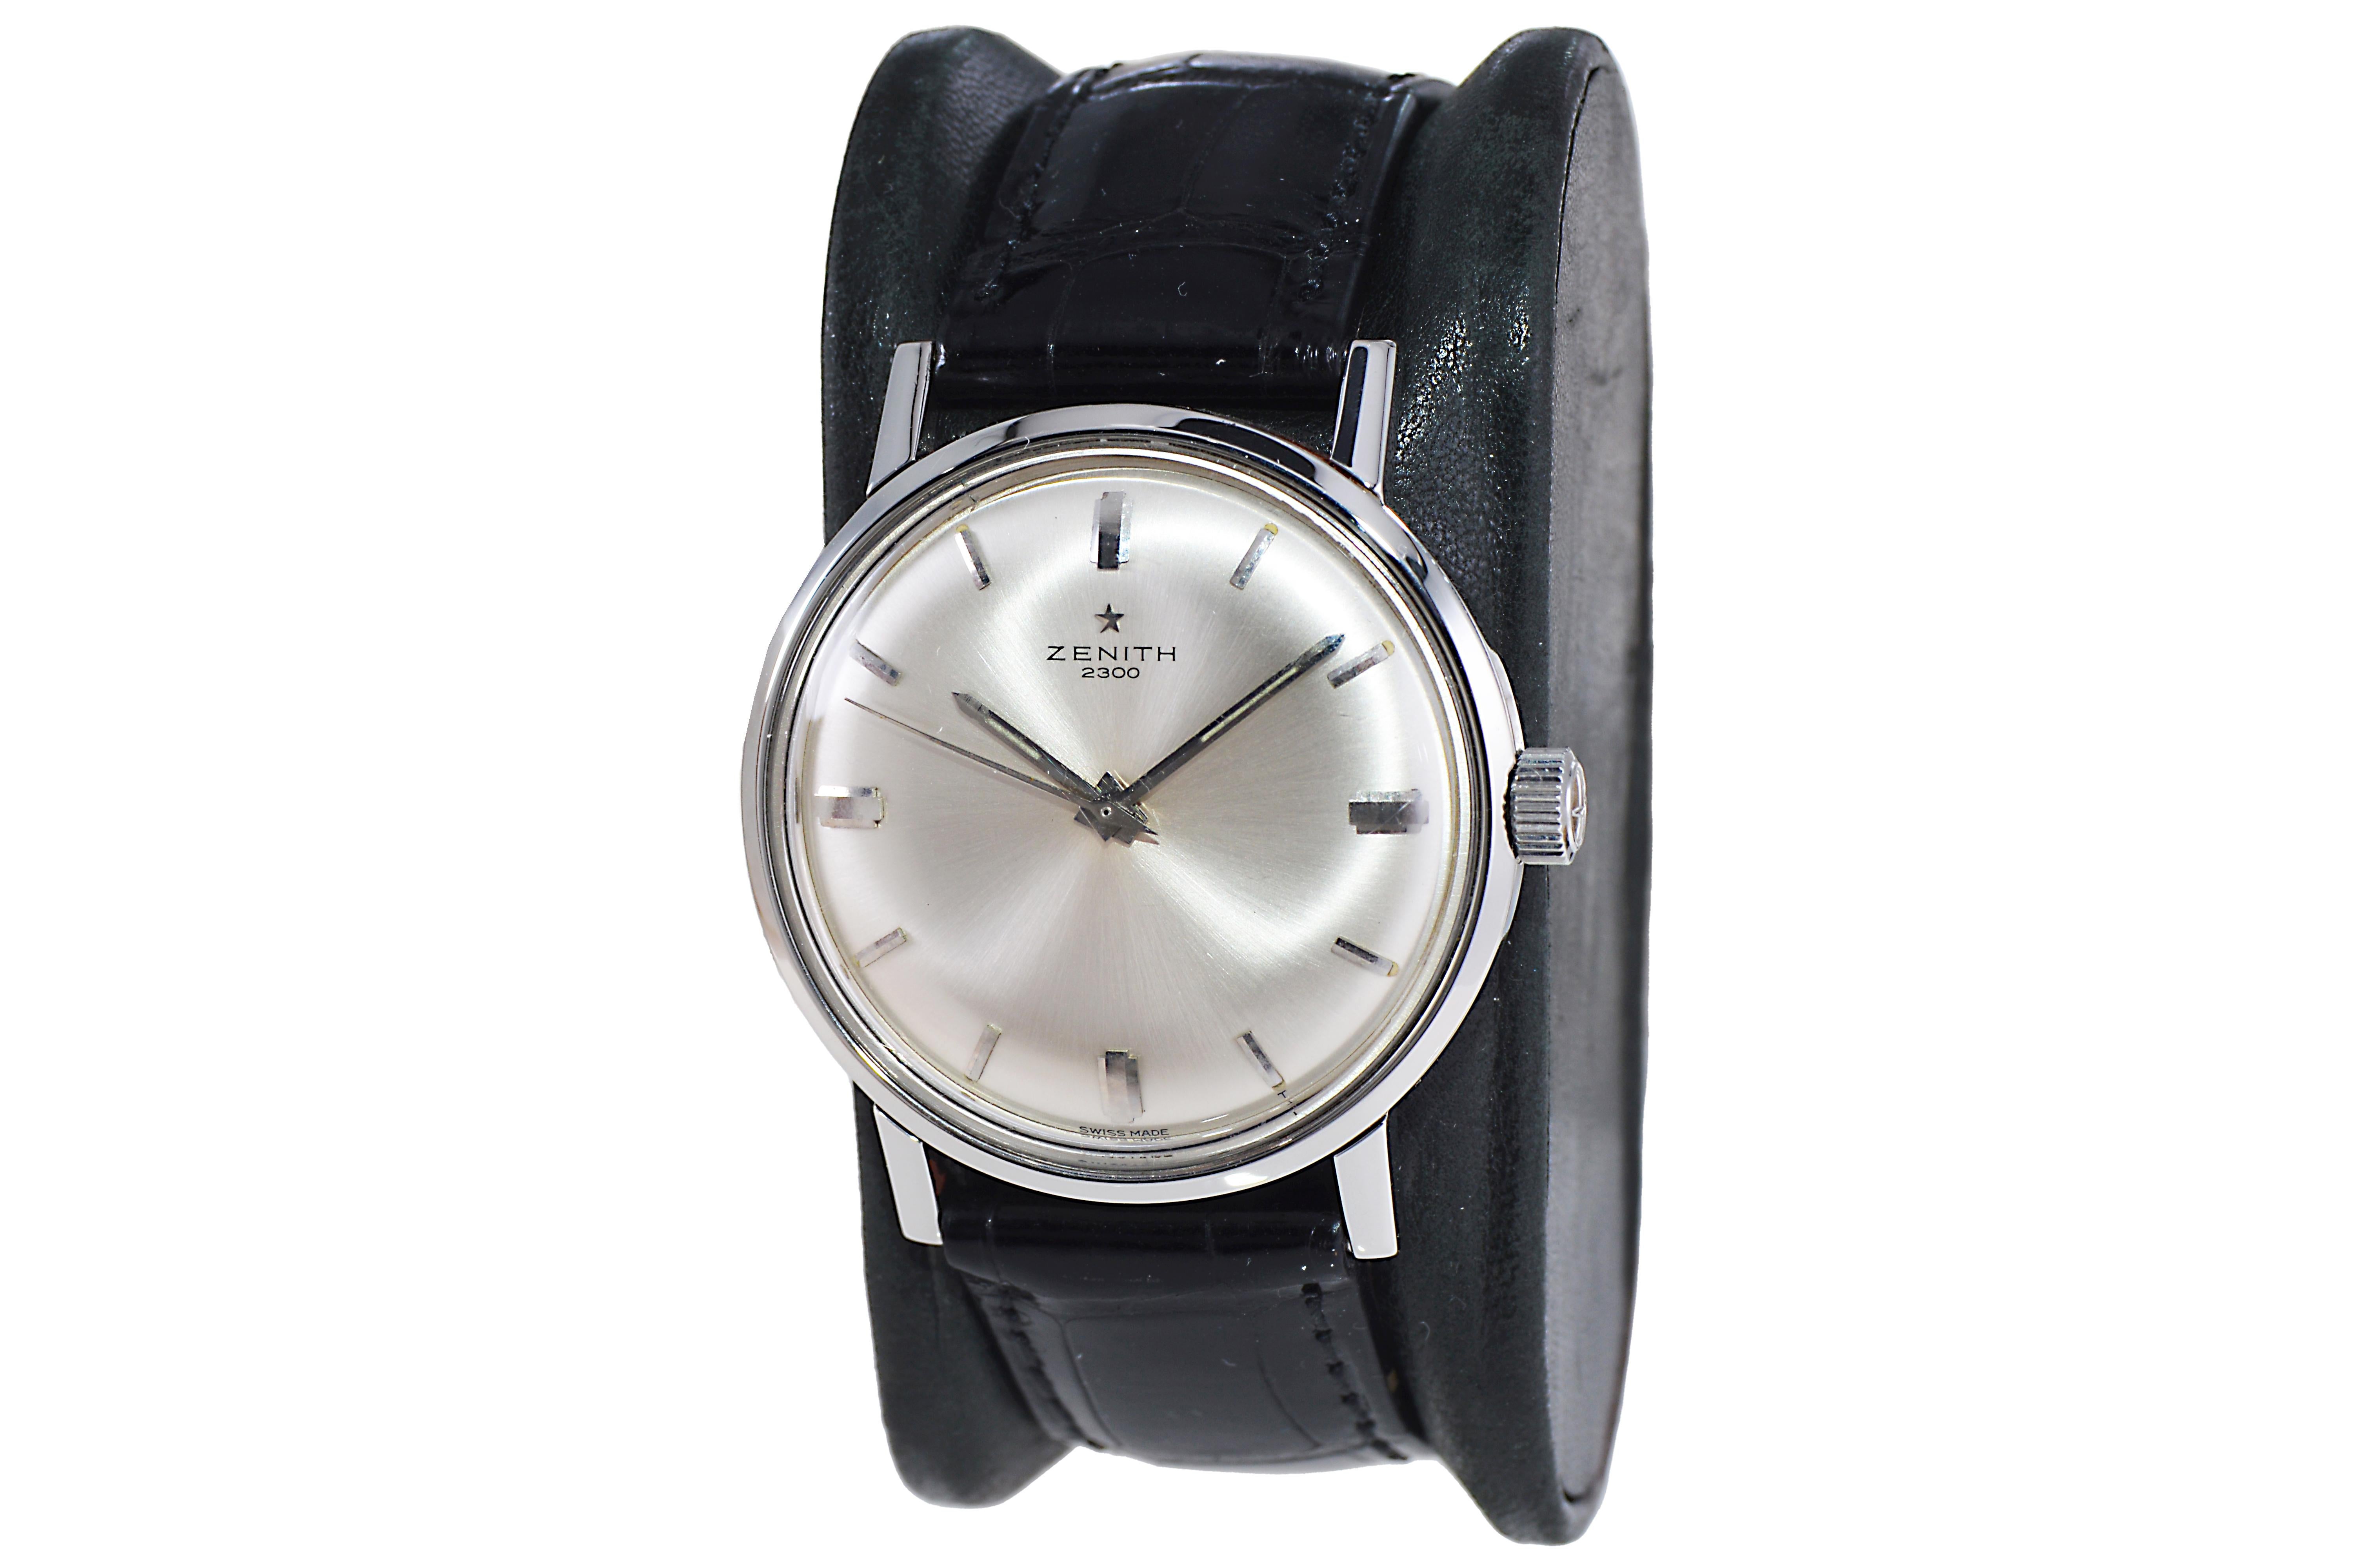 Art Deco Zenith Stainless Steel Original Dial Manual Wind Watch, circa 1950s For Sale